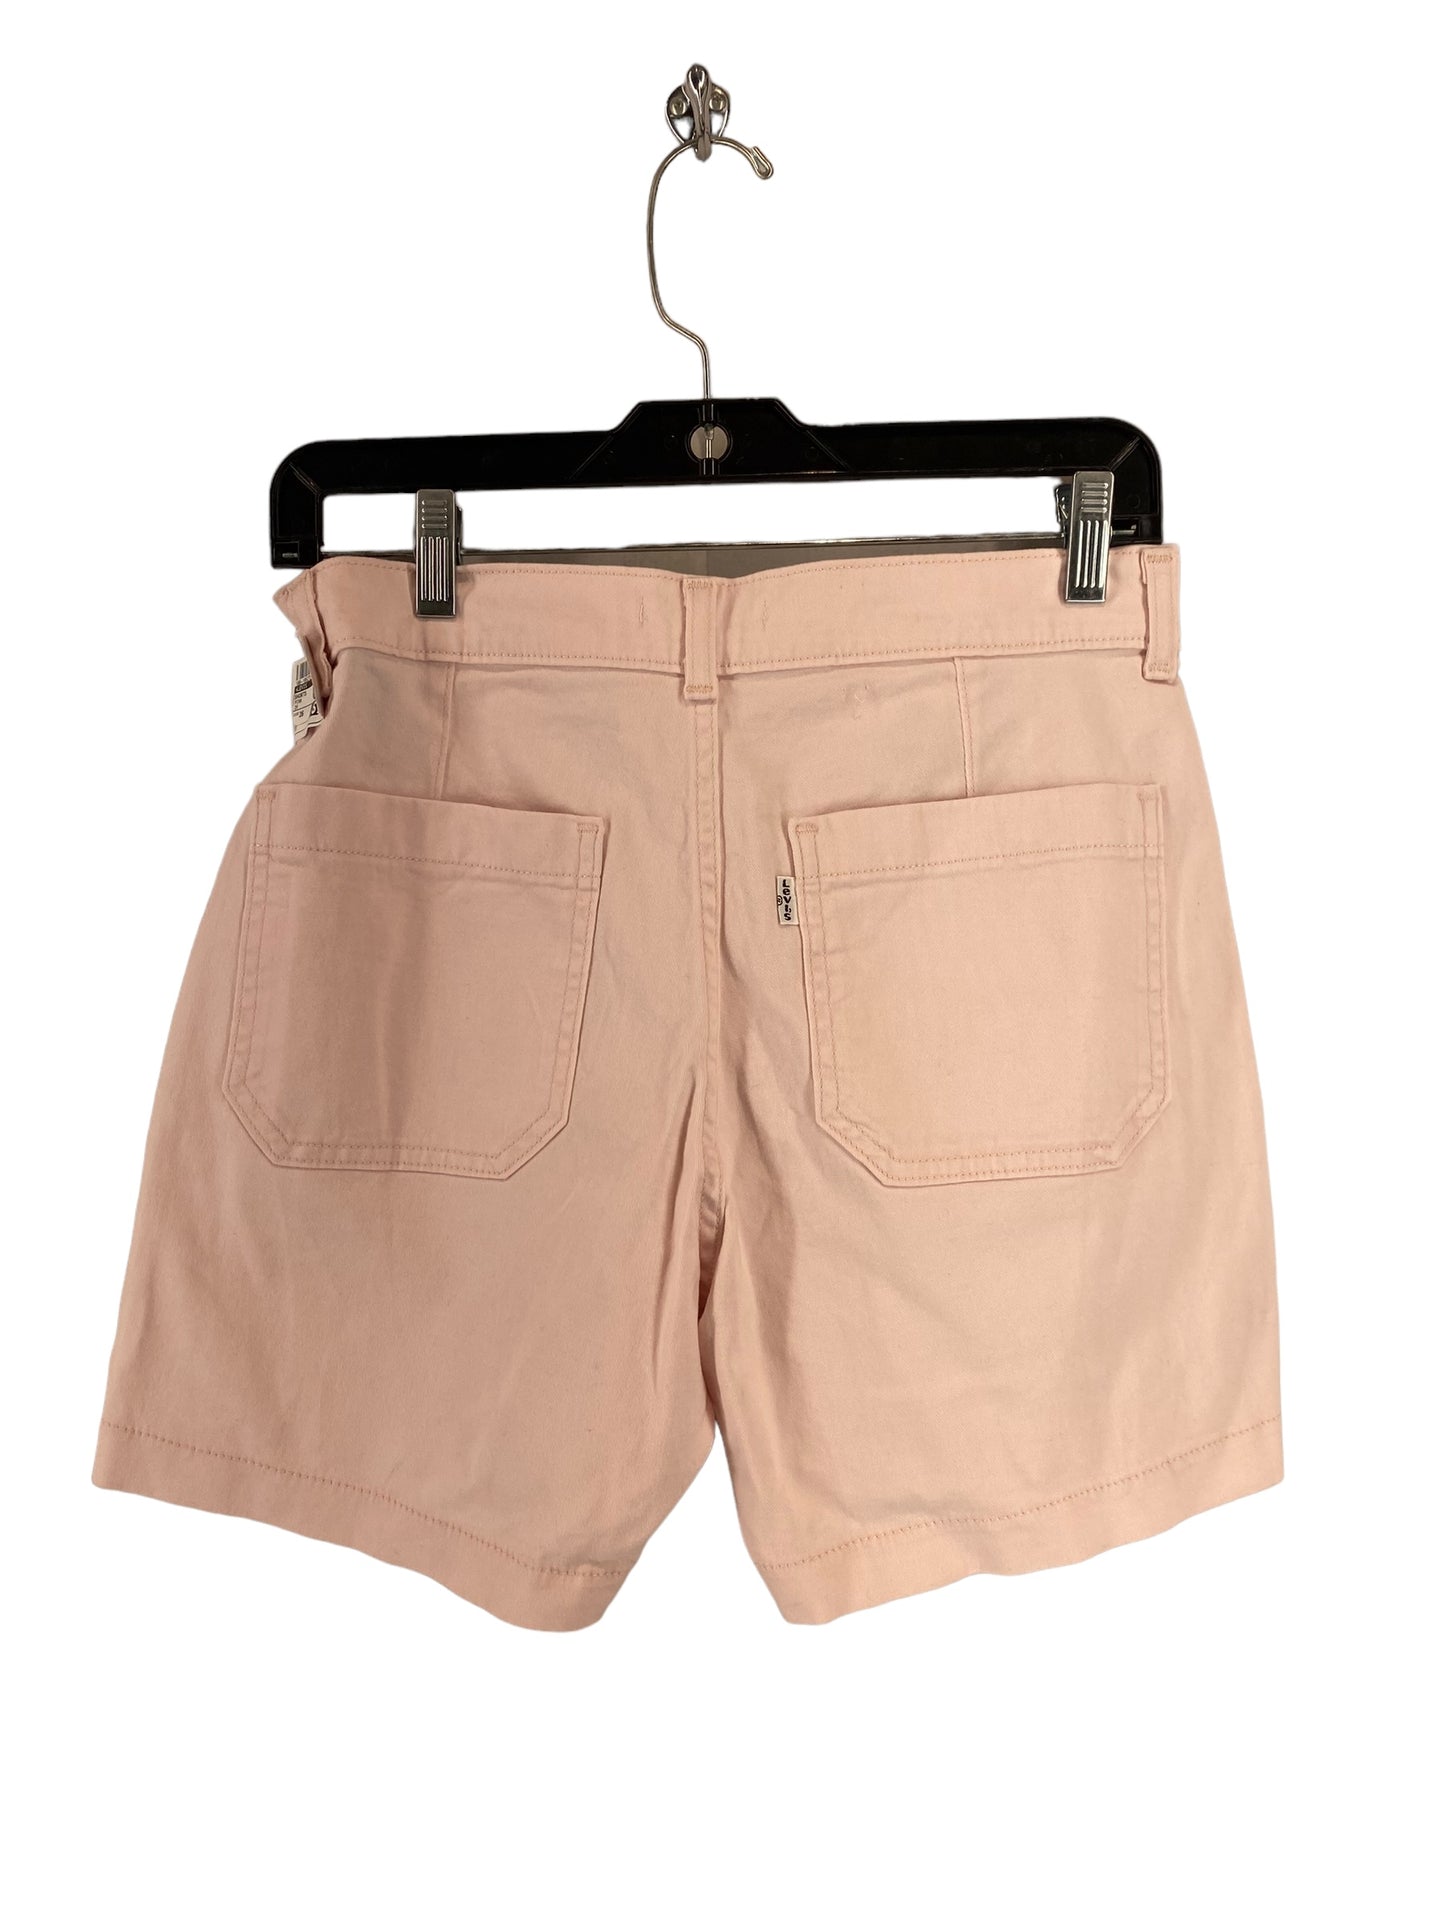 Shorts By Levis  Size: 26